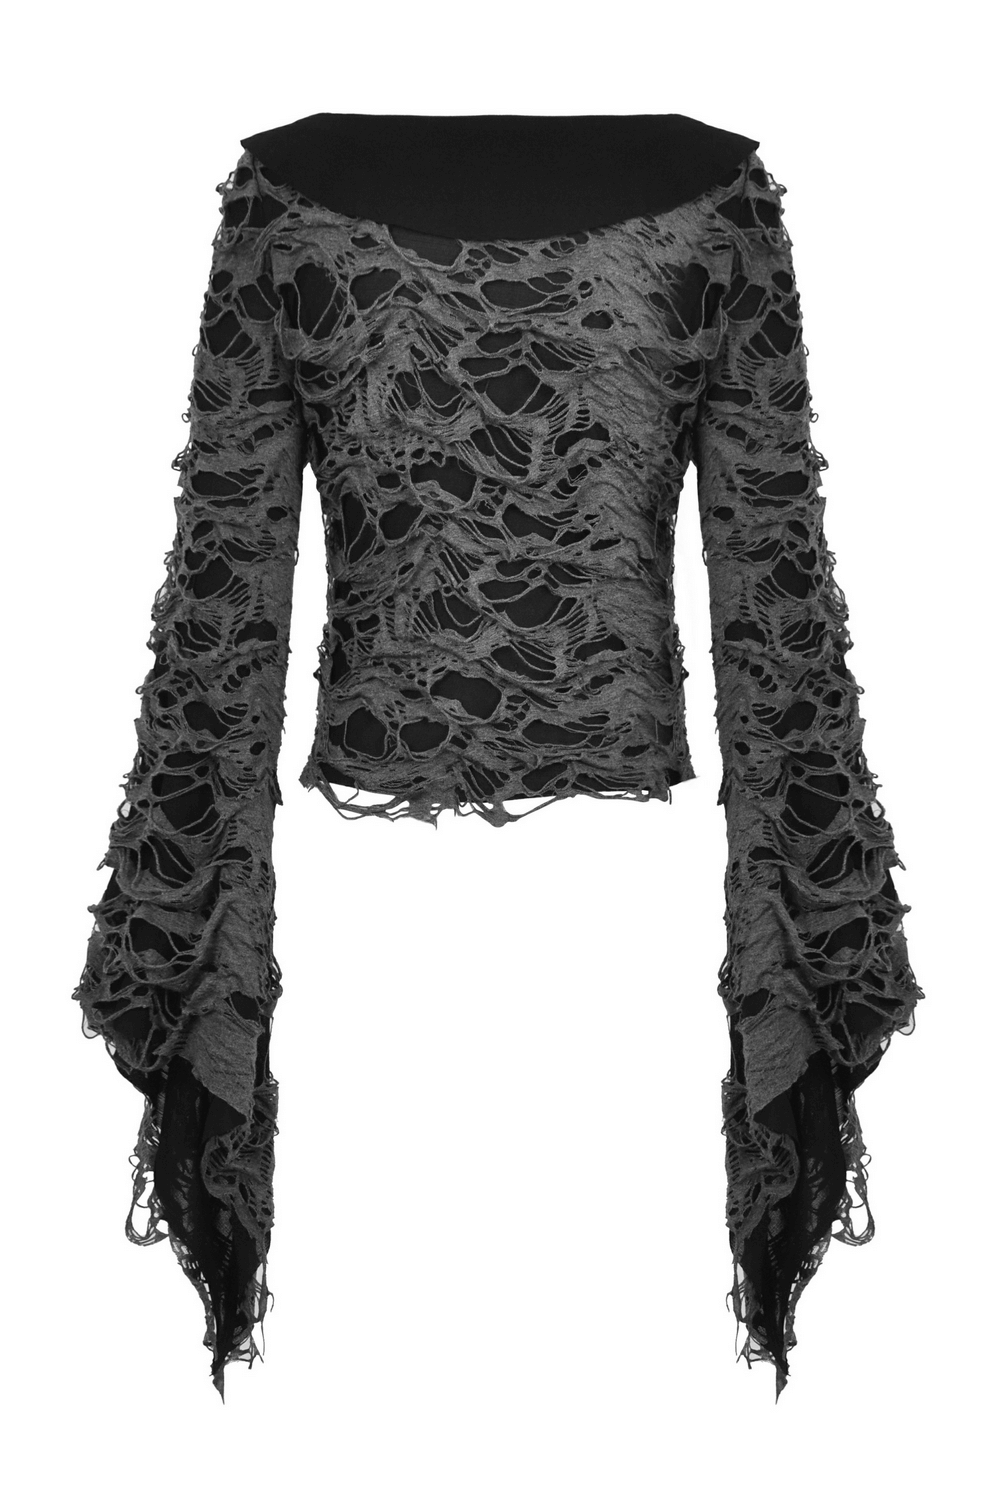 Gothic Women's Lace-Up Shredded Top with Bell Sleeves